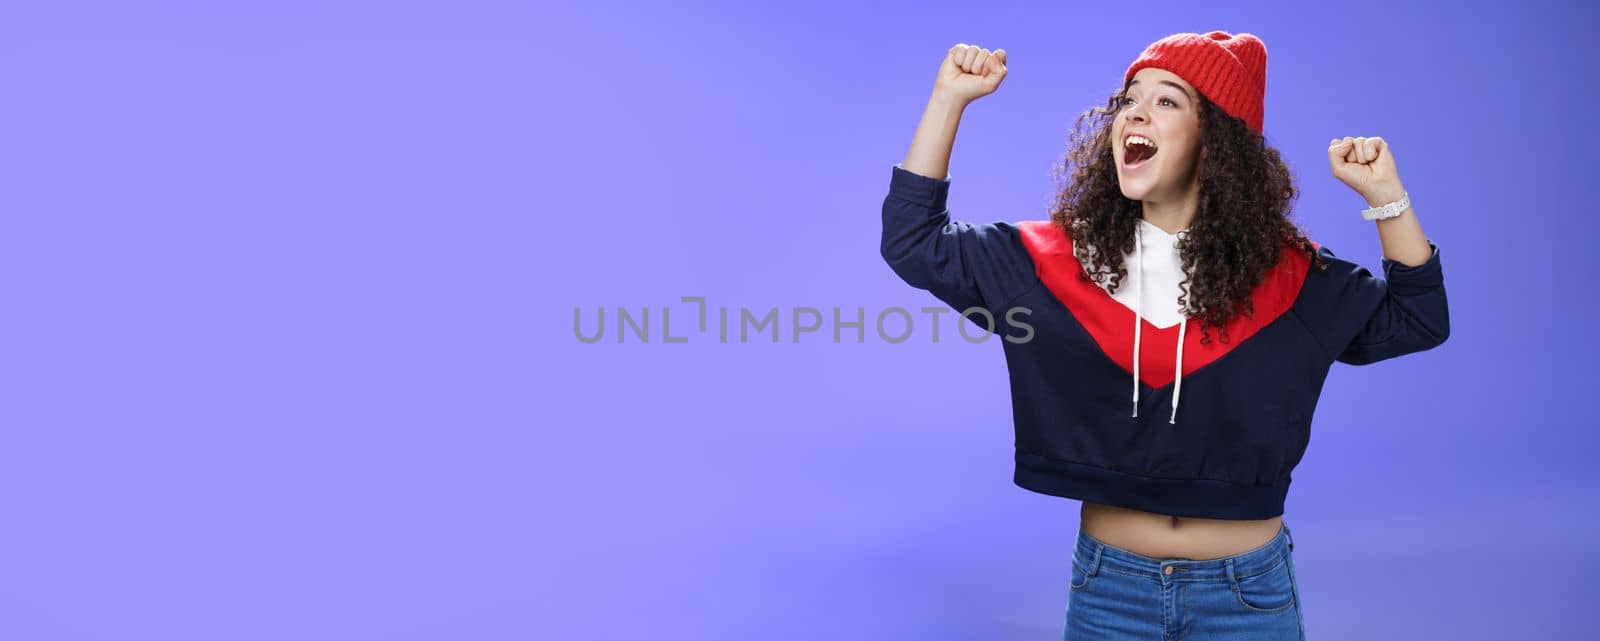 Happy playful and carefree woman yelling out loud tell world great news looking left amused and delighted as shouting positive words raising hands in triumph, cheering for team, wearing hat.